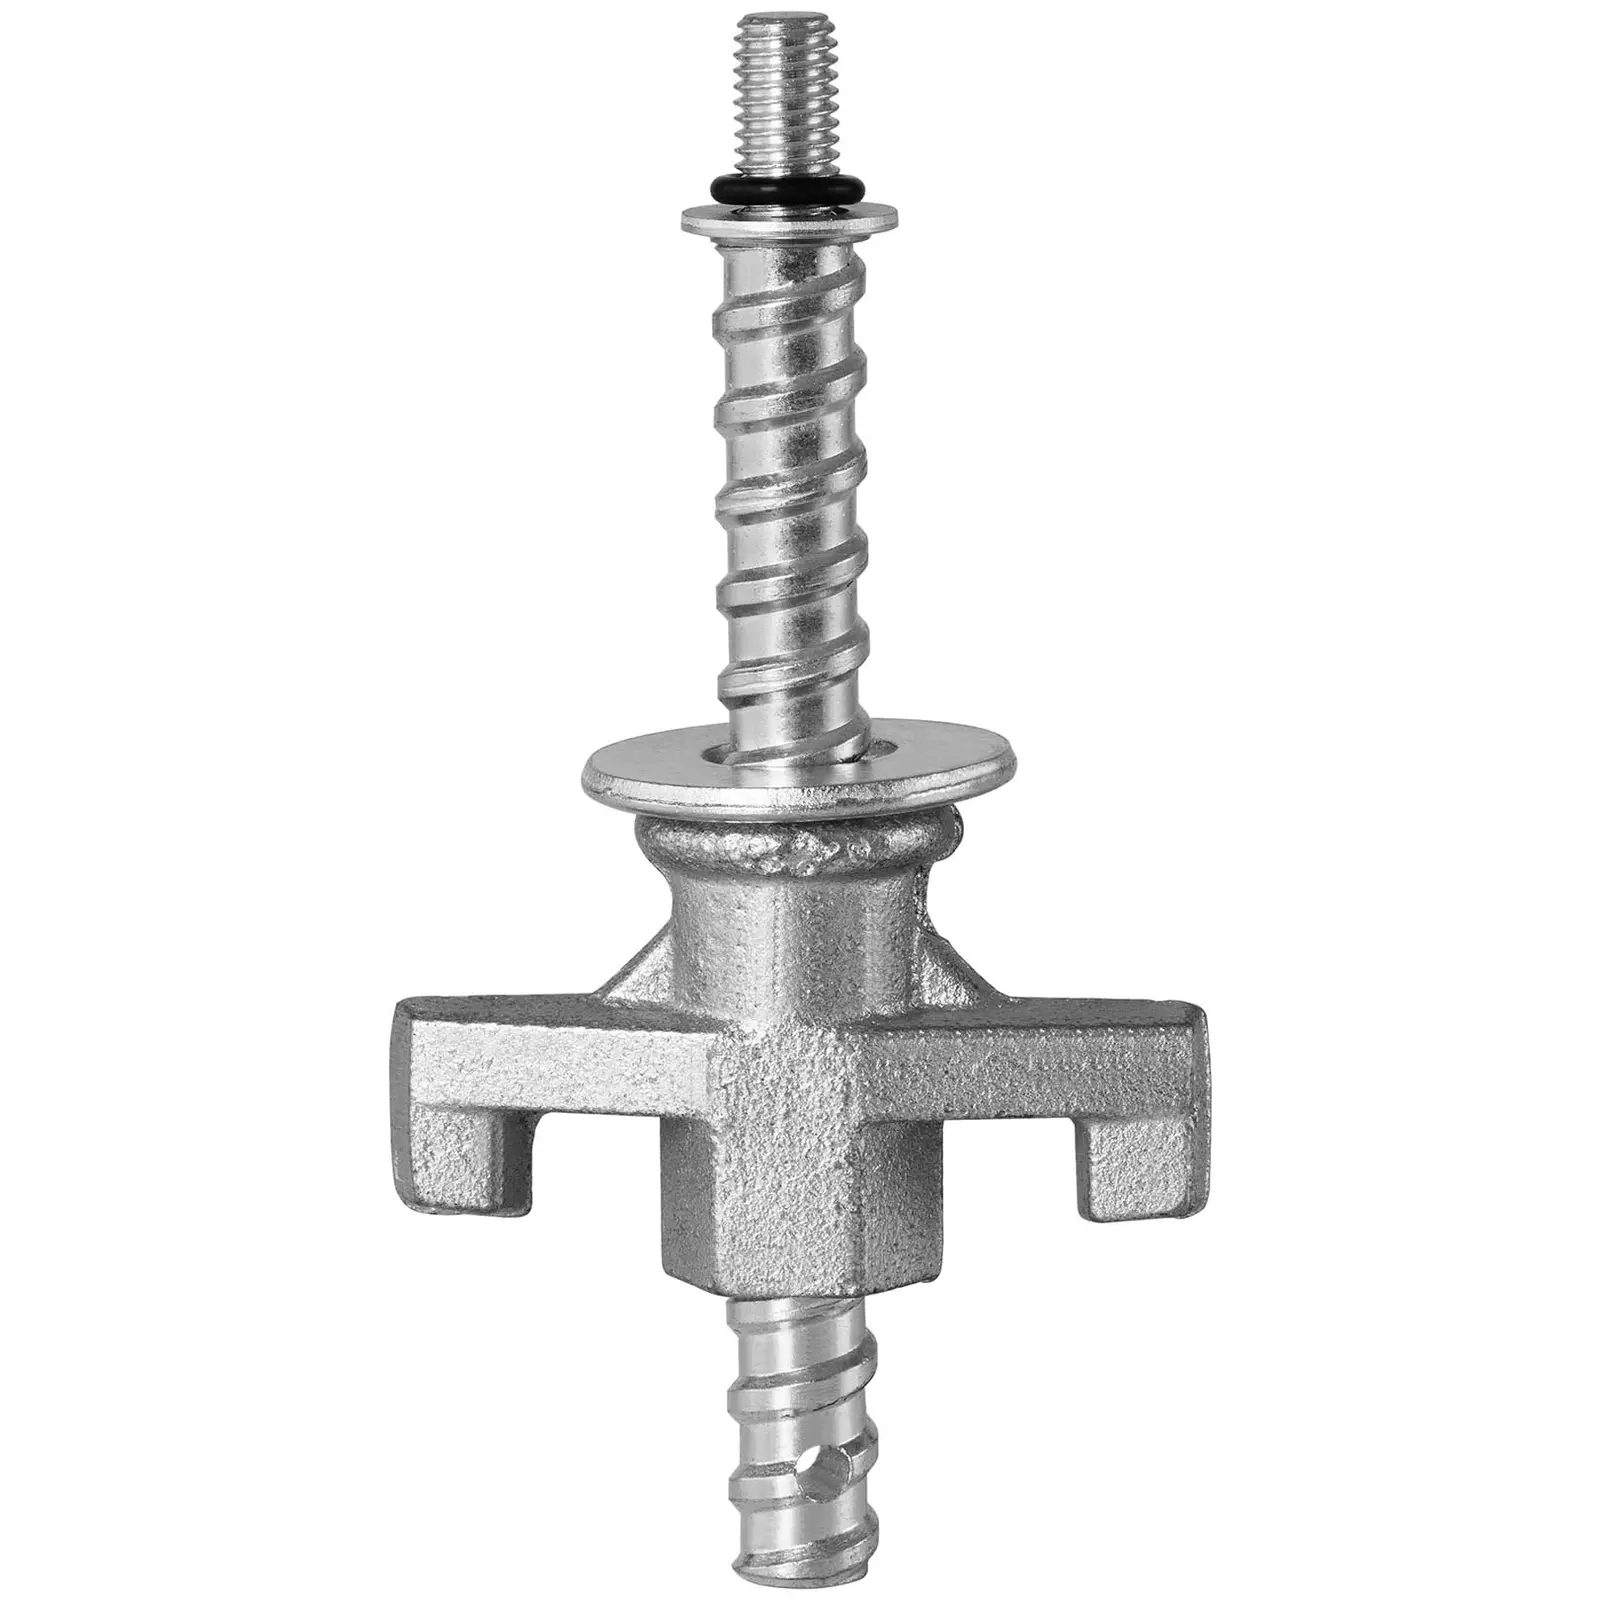 Vacuum Base - for core drill stand - 33.5 x 42.5 cm